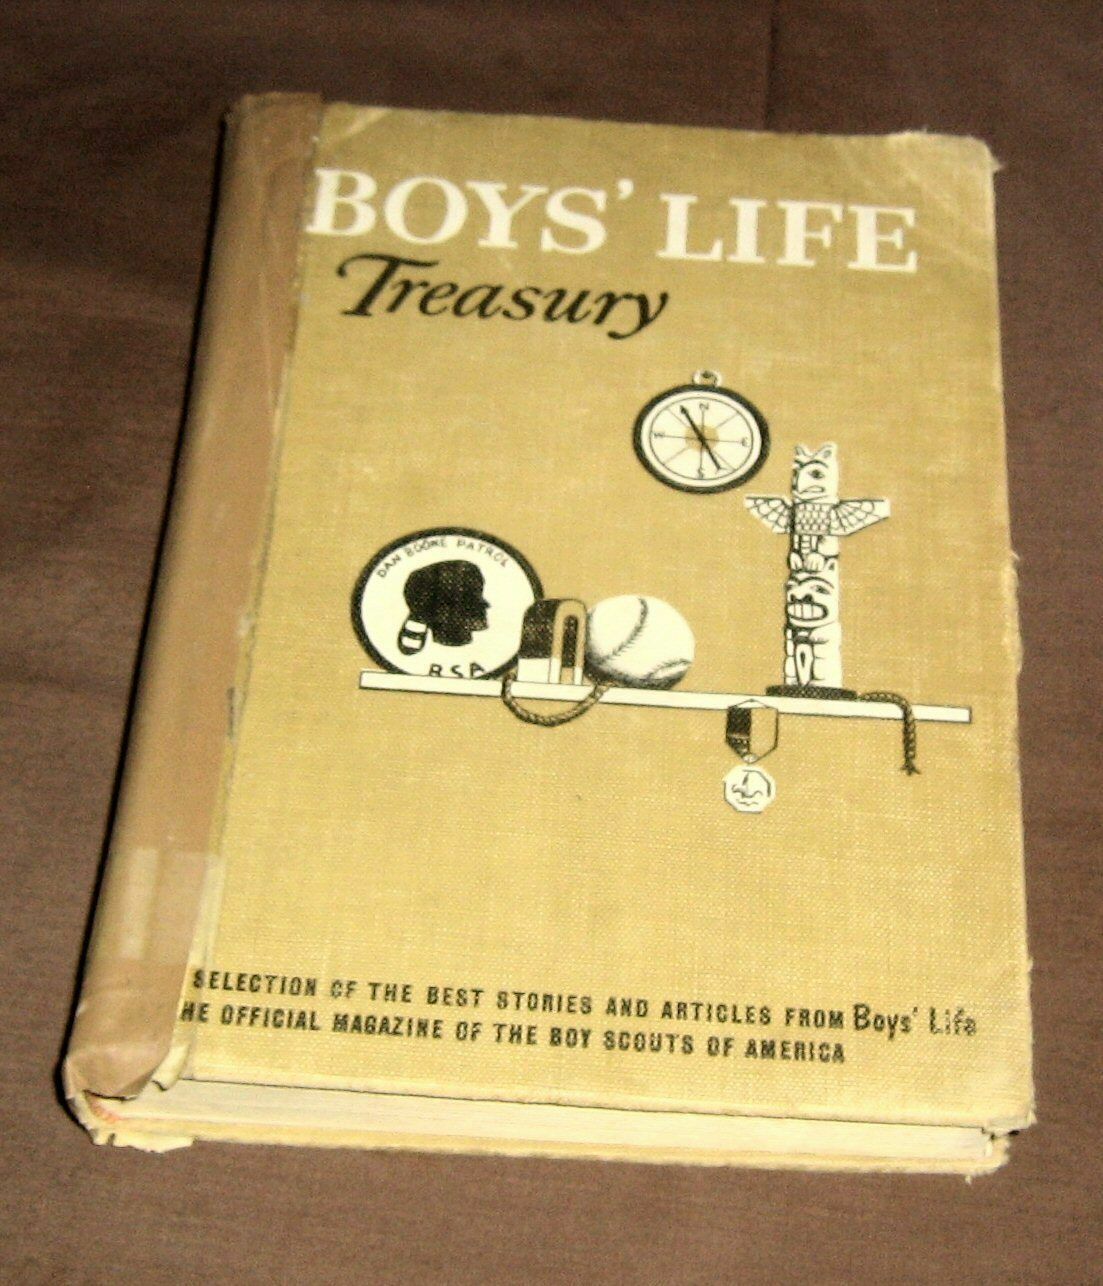 Vintage 1958 Boys Life Treasury,Stories & Articles from Boy Scouts of America